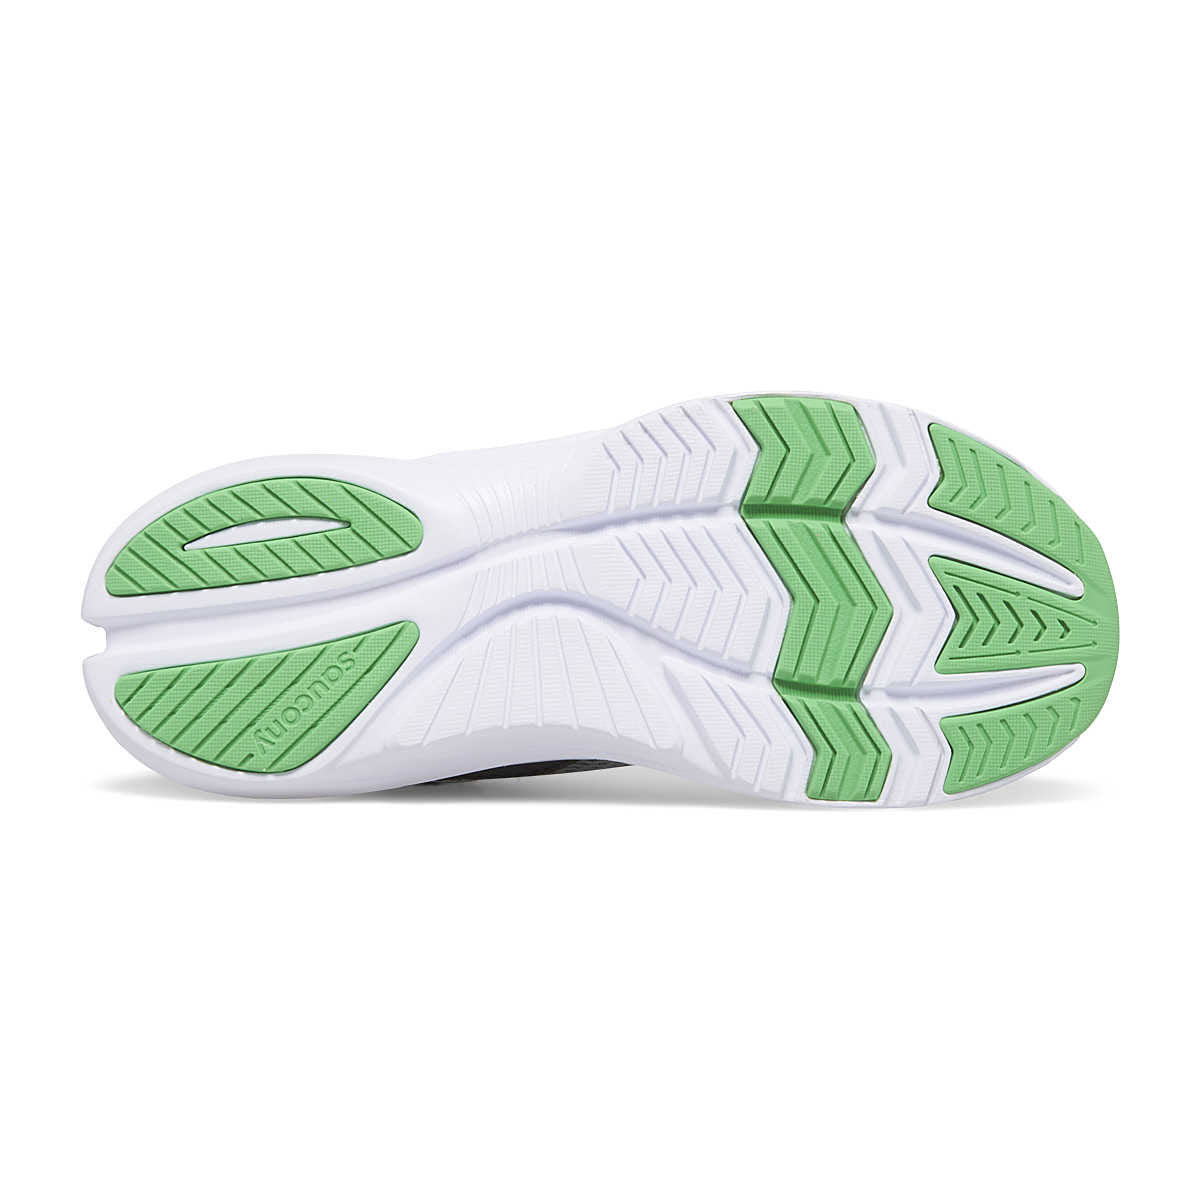 White and green rubber sole of a Saucony sports shoe, featuring eco-friendly comfort, showing treads and Saucony brand logo.